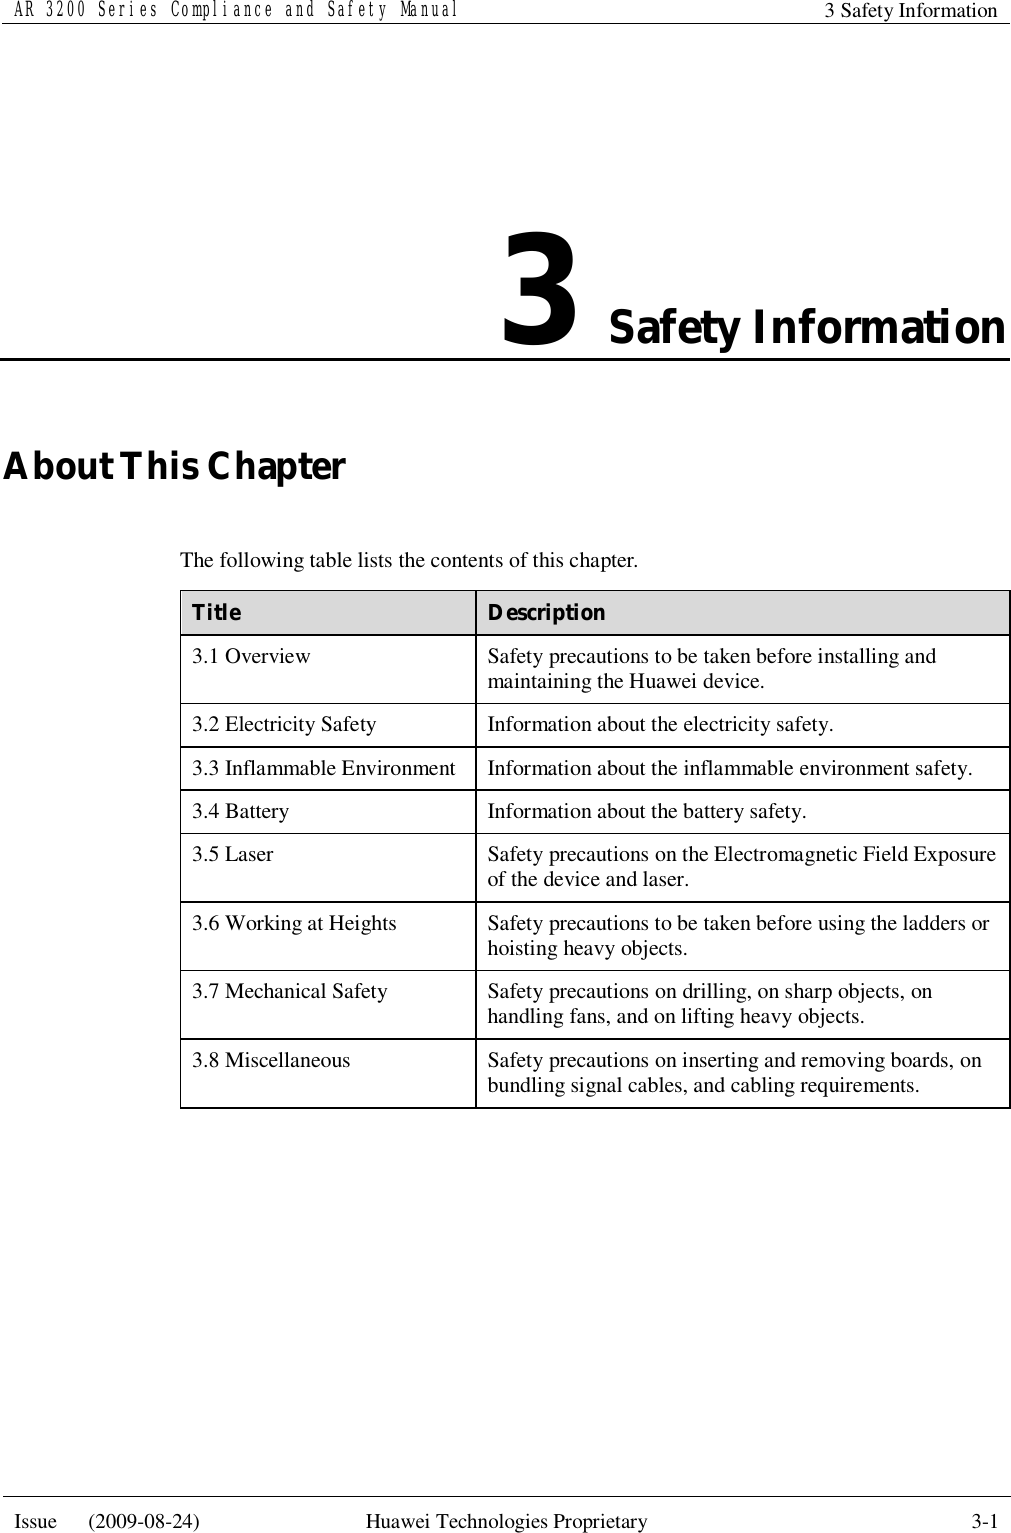 AR 3200 Series Compliance and Safety Manual 3 Safety Information  Issue   (2009-08-24)  Huawei Technologies Proprietary  3-1  3 Safety Information About This Chapter The following table lists the contents of this chapter. Title  Description 3.1 Overview  Safety precautions to be taken before installing and maintaining the Huawei device. 3.2 Electricity Safety  Information about the electricity safety. 3.3 Inflammable Environment  Information about the inflammable environment safety. 3.4 Battery  Information about the battery safety. 3.5 Laser  Safety precautions on the Electromagnetic Field Exposure of the device and laser. 3.6 Working at Heights  Safety precautions to be taken before using the ladders or hoisting heavy objects. 3.7 Mechanical Safety  Safety precautions on drilling, on sharp objects, on handling fans, and on lifting heavy objects. 3.8 Miscellaneous  Safety precautions on inserting and removing boards, on bundling signal cables, and cabling requirements.  